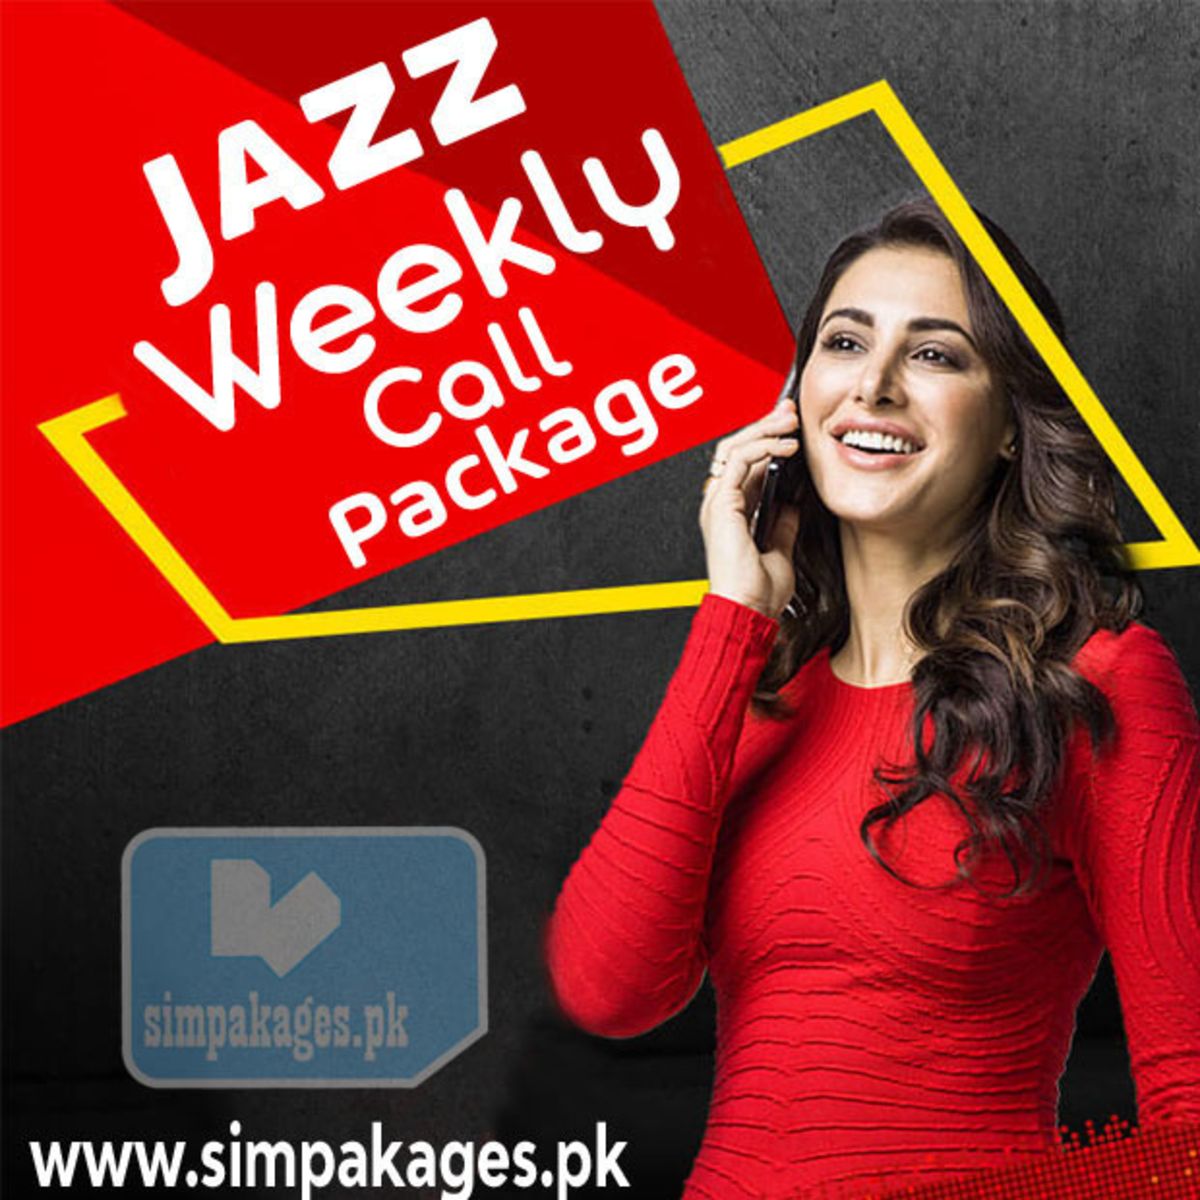 Jazz Weekly Call Packages